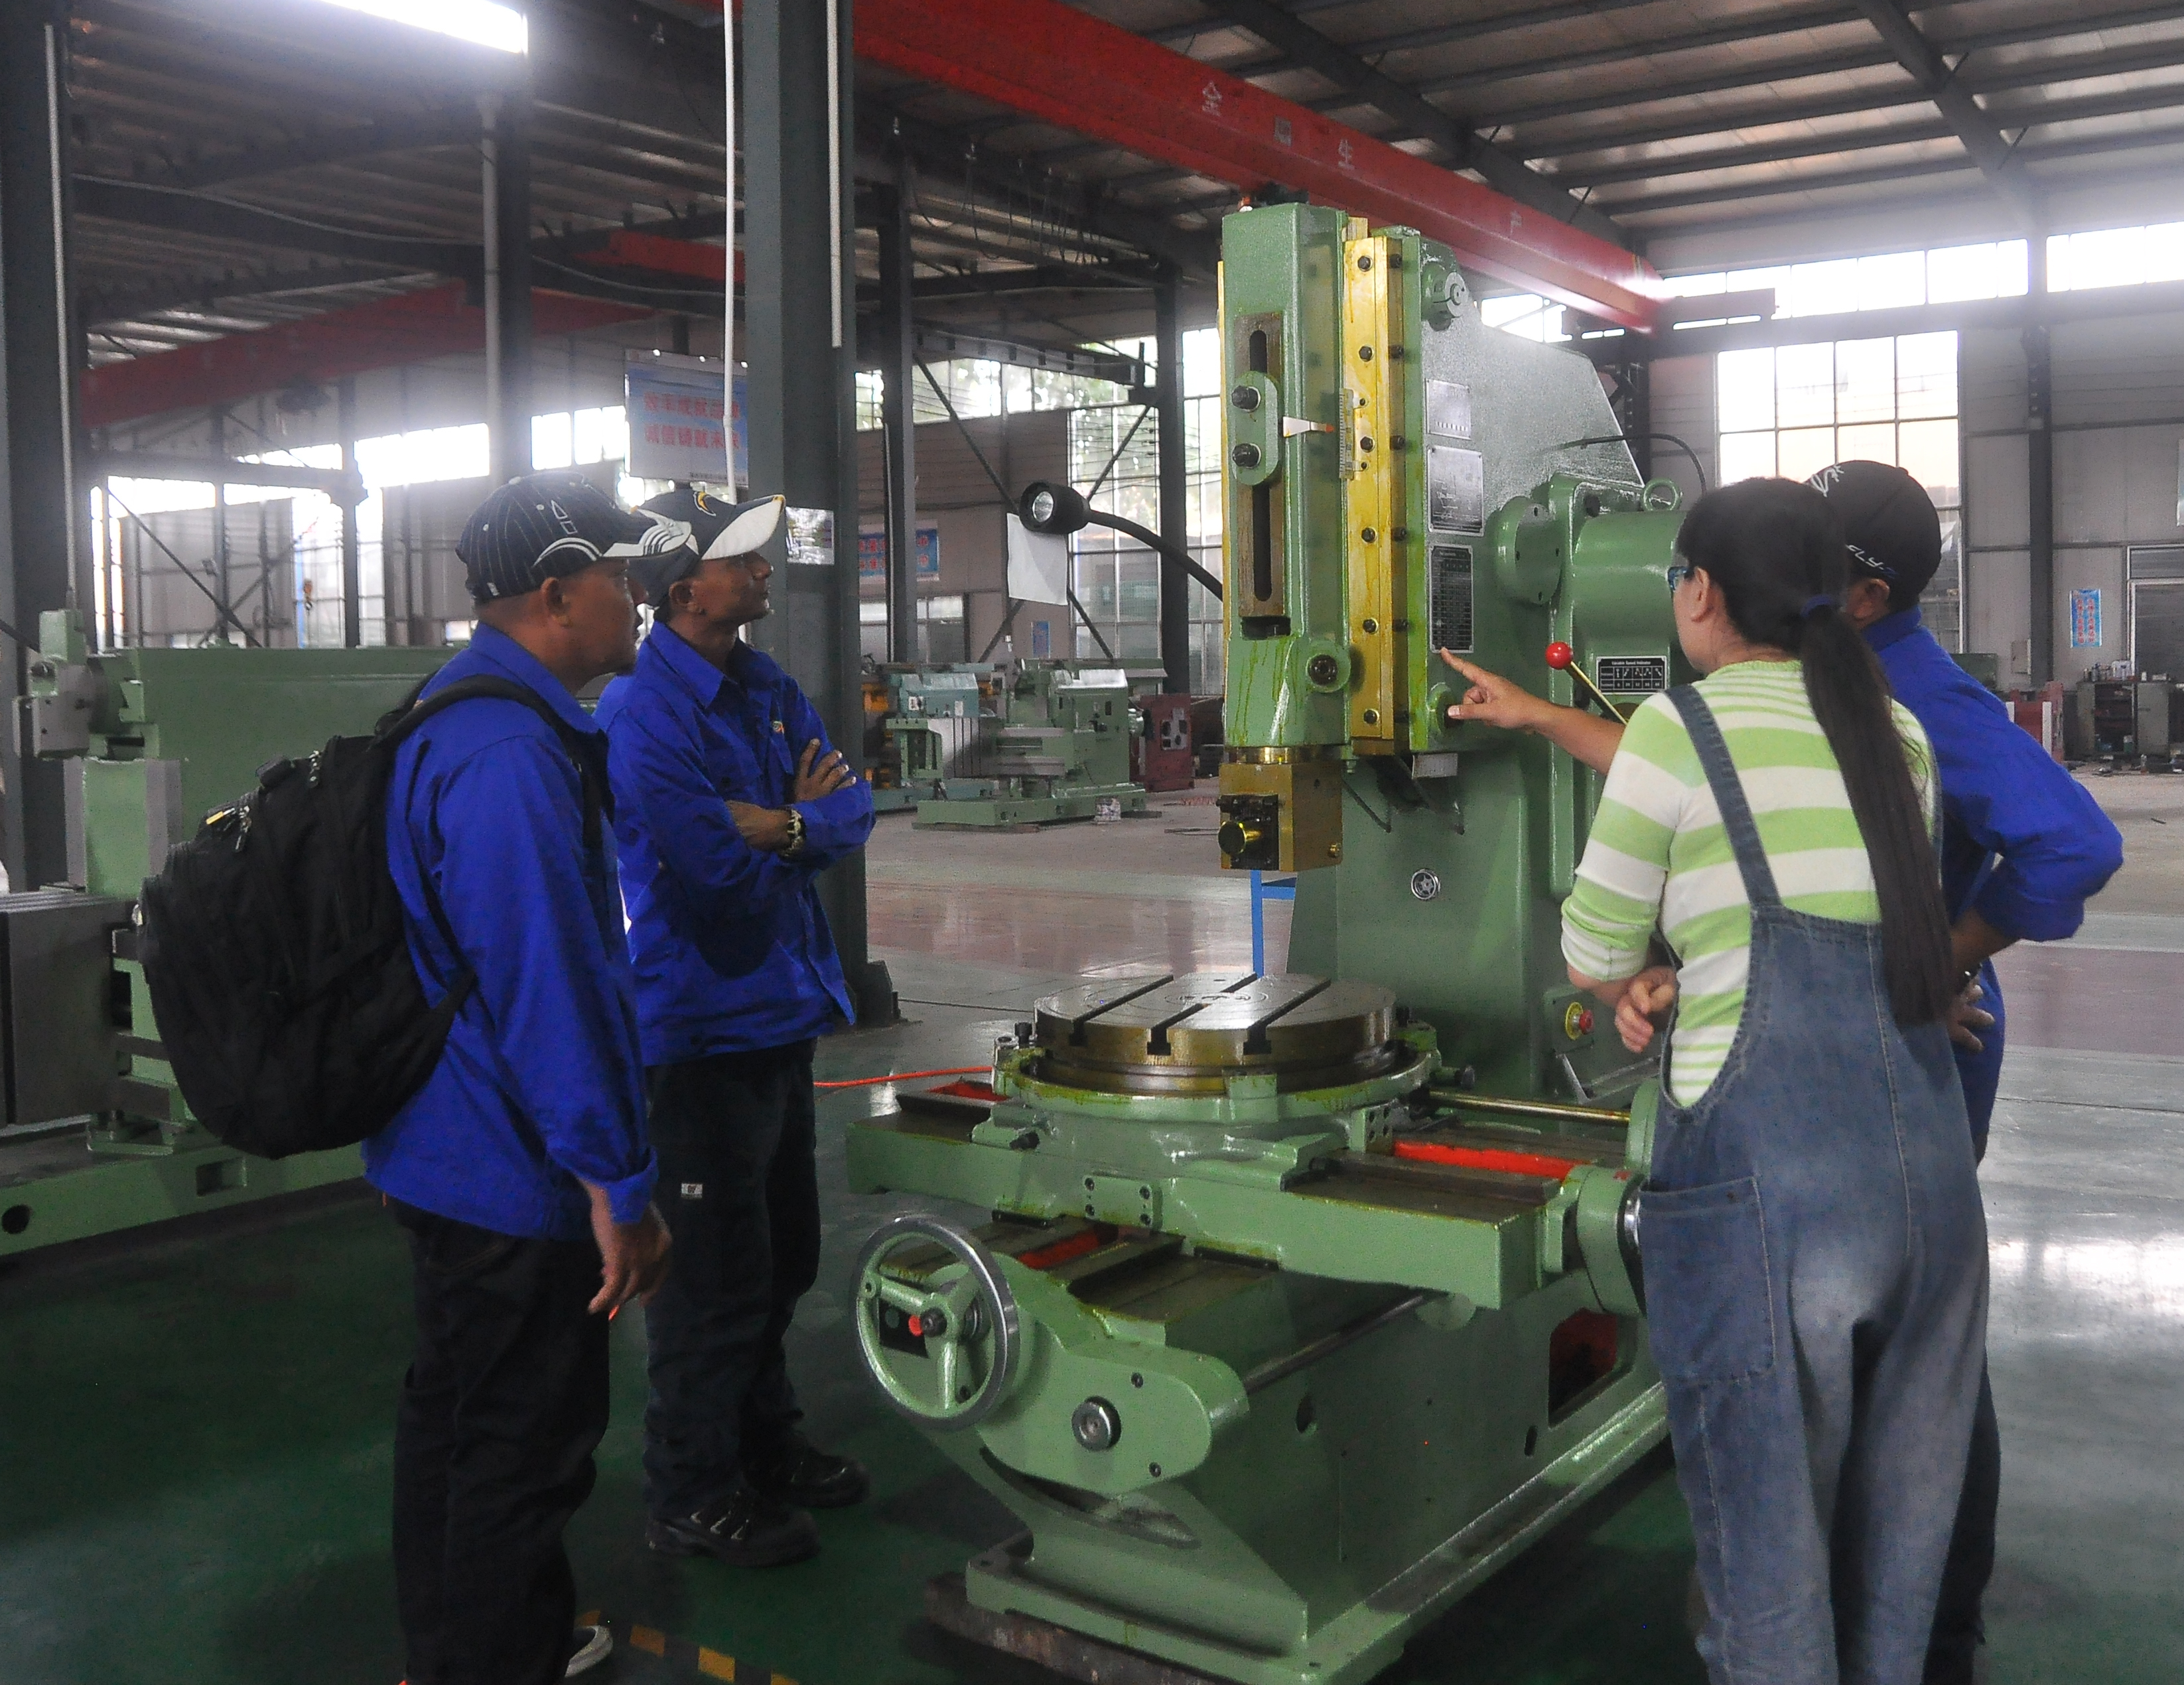 Malaysian customers came to the factory for inspection and were interested in slotting machines. After communication and understanding, they were assured of the quality of our factory’s machi...